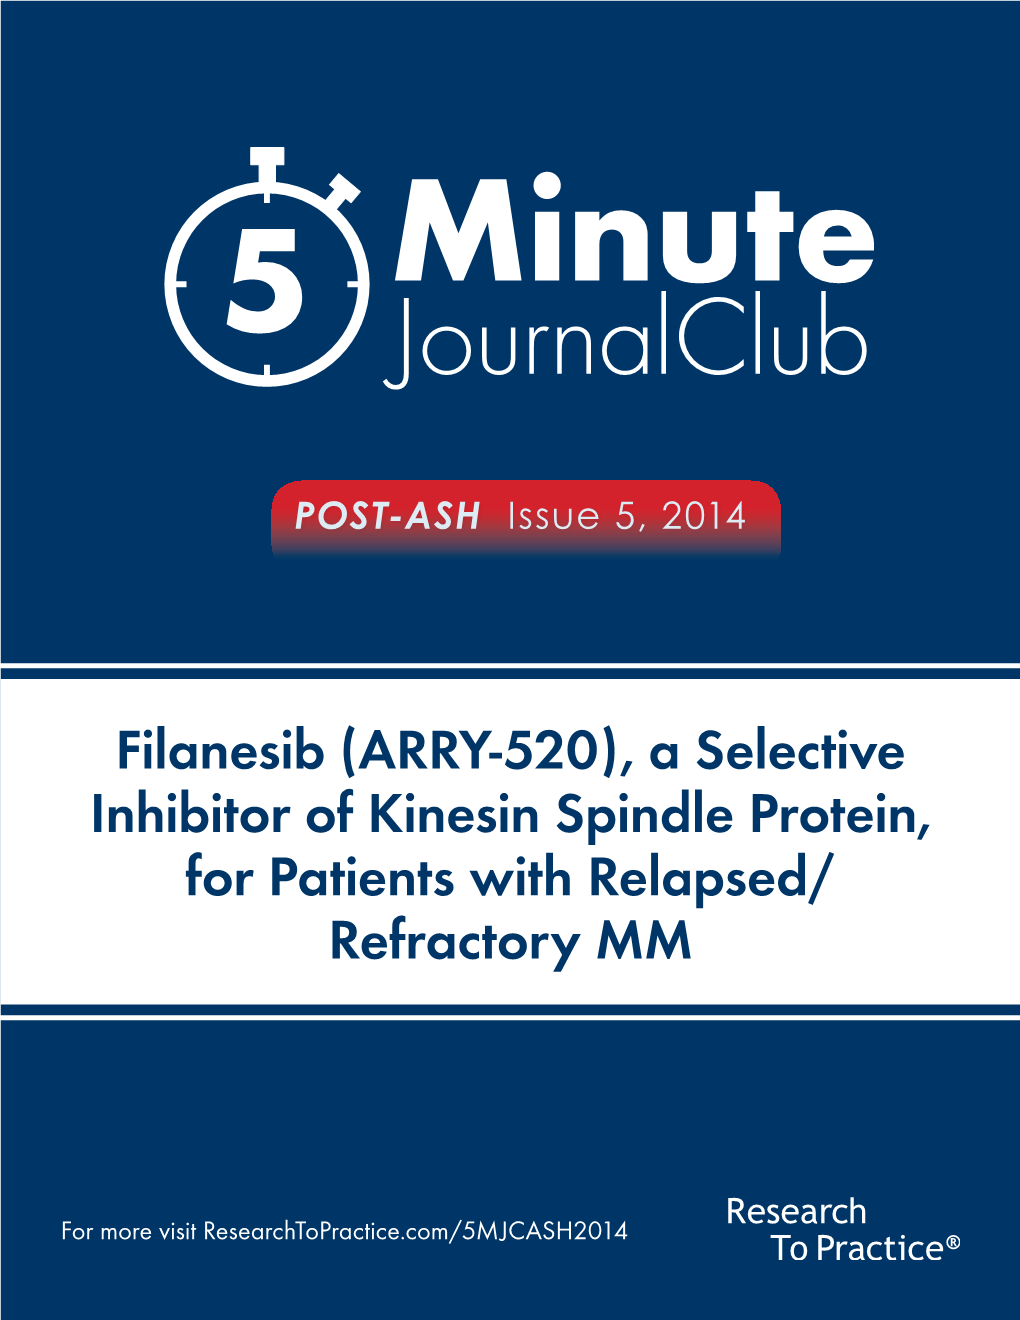 A Selective Inhibitor of Kinesin Spindle Protein, for Patients with Relapsed/ Refractory MM